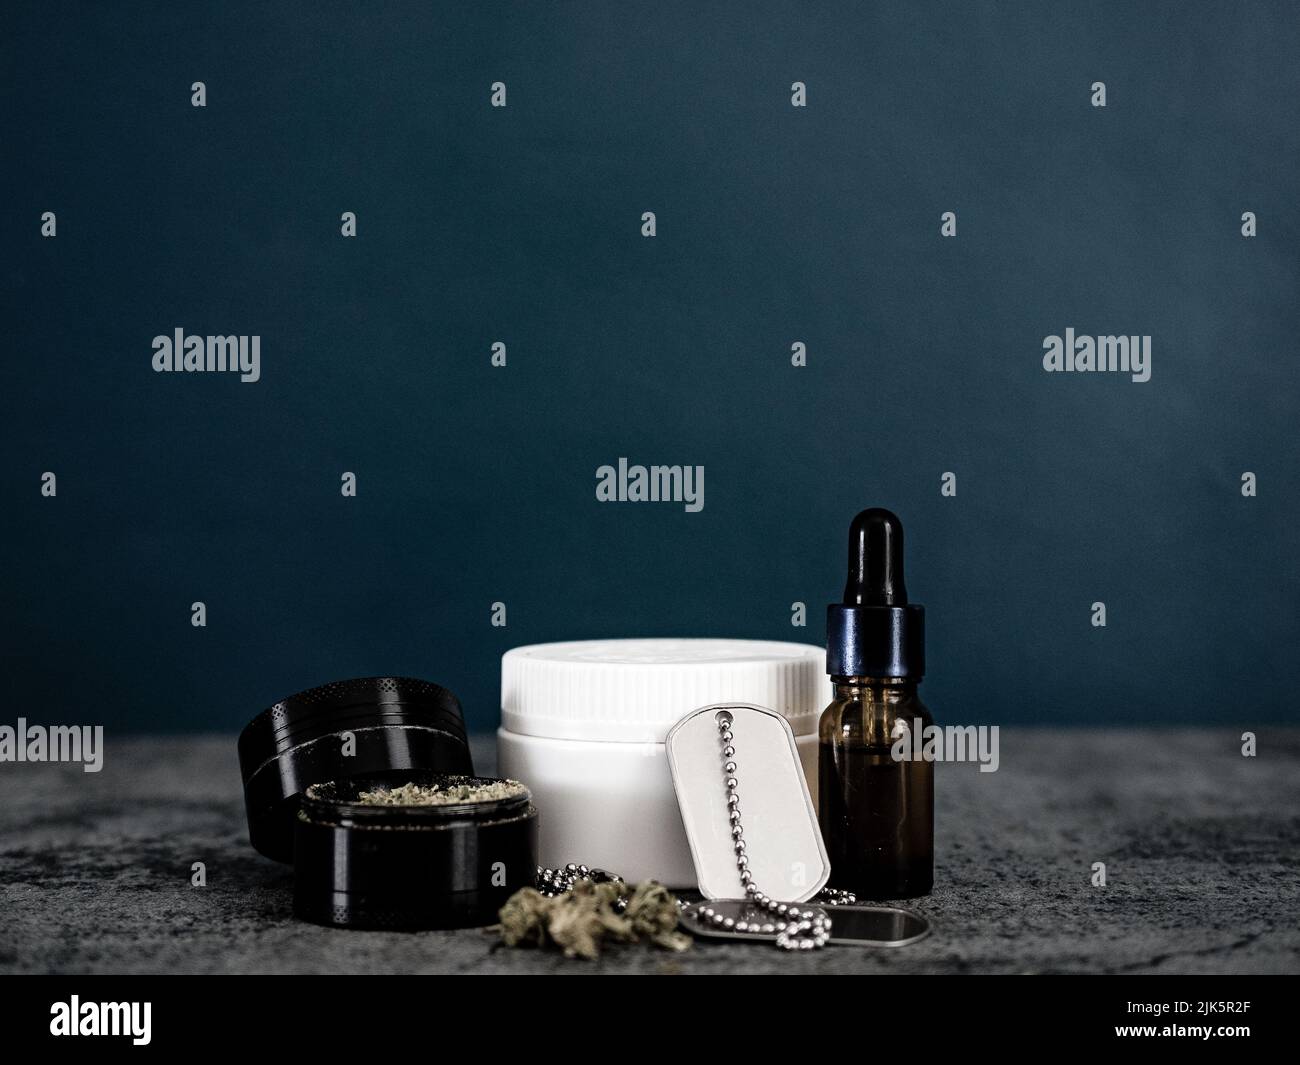 Lifestyle medical cannabis images, Cannabis users include sufferers of PTSD and chronic pain. Dry herb Vaping is the future for cannabis. Stock Photo